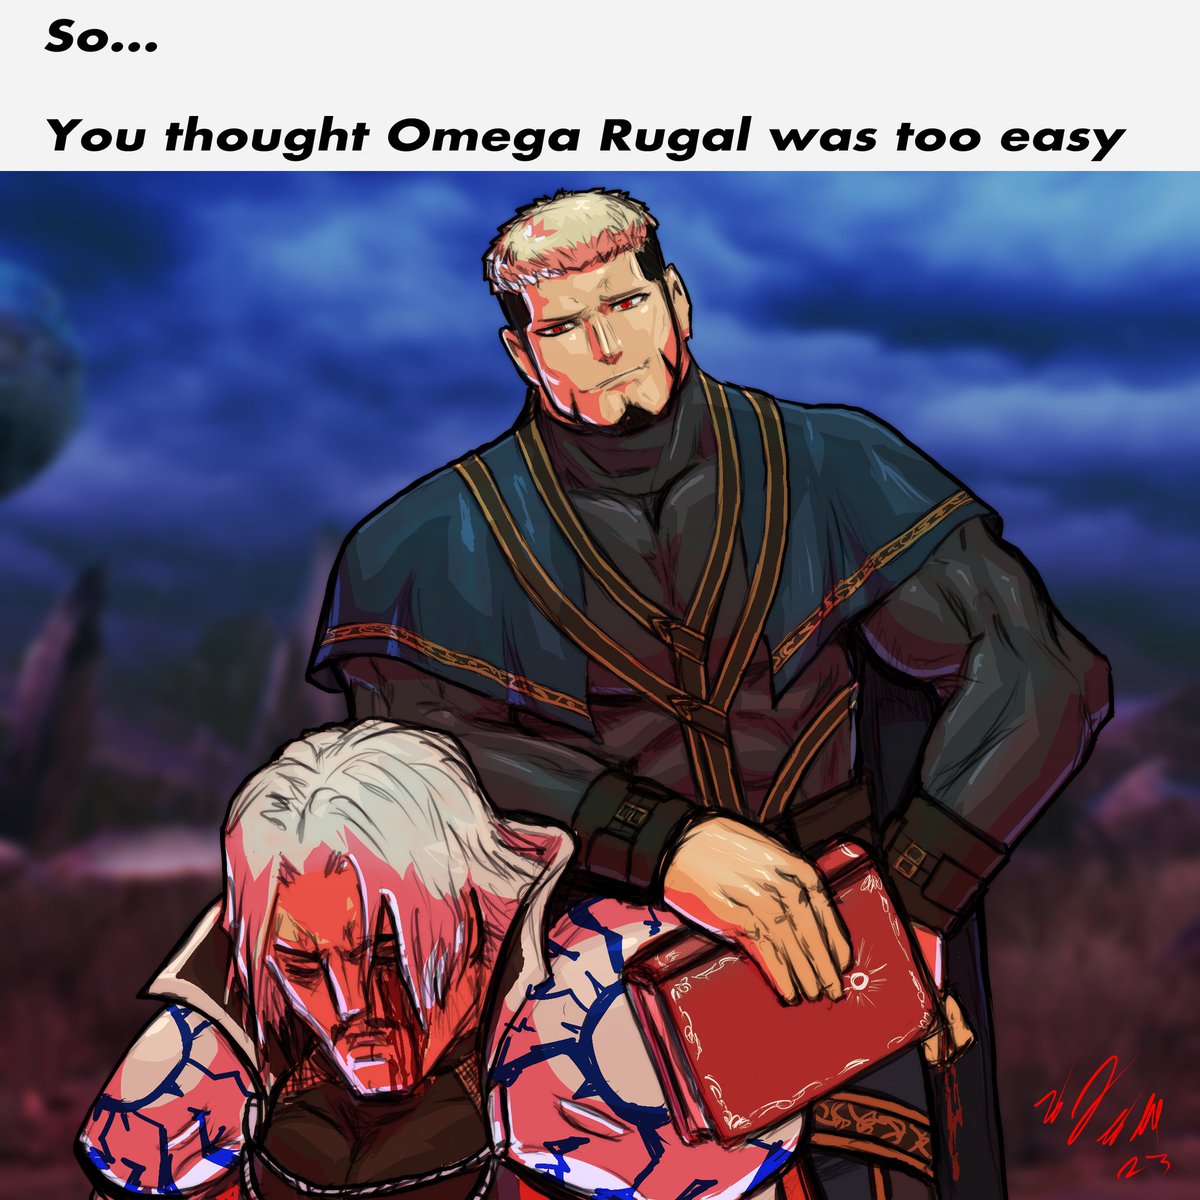 Well, although you can cheese him out, he most definitely is harder than Omega Rugal. His winning quote for Rugal,  Yama, &Shermie interested me. SNK was definitely listening.
#goenitz #omegarugal #kofxv #thekingoffighters #fgc #fightinggames #fightinggamecommunity